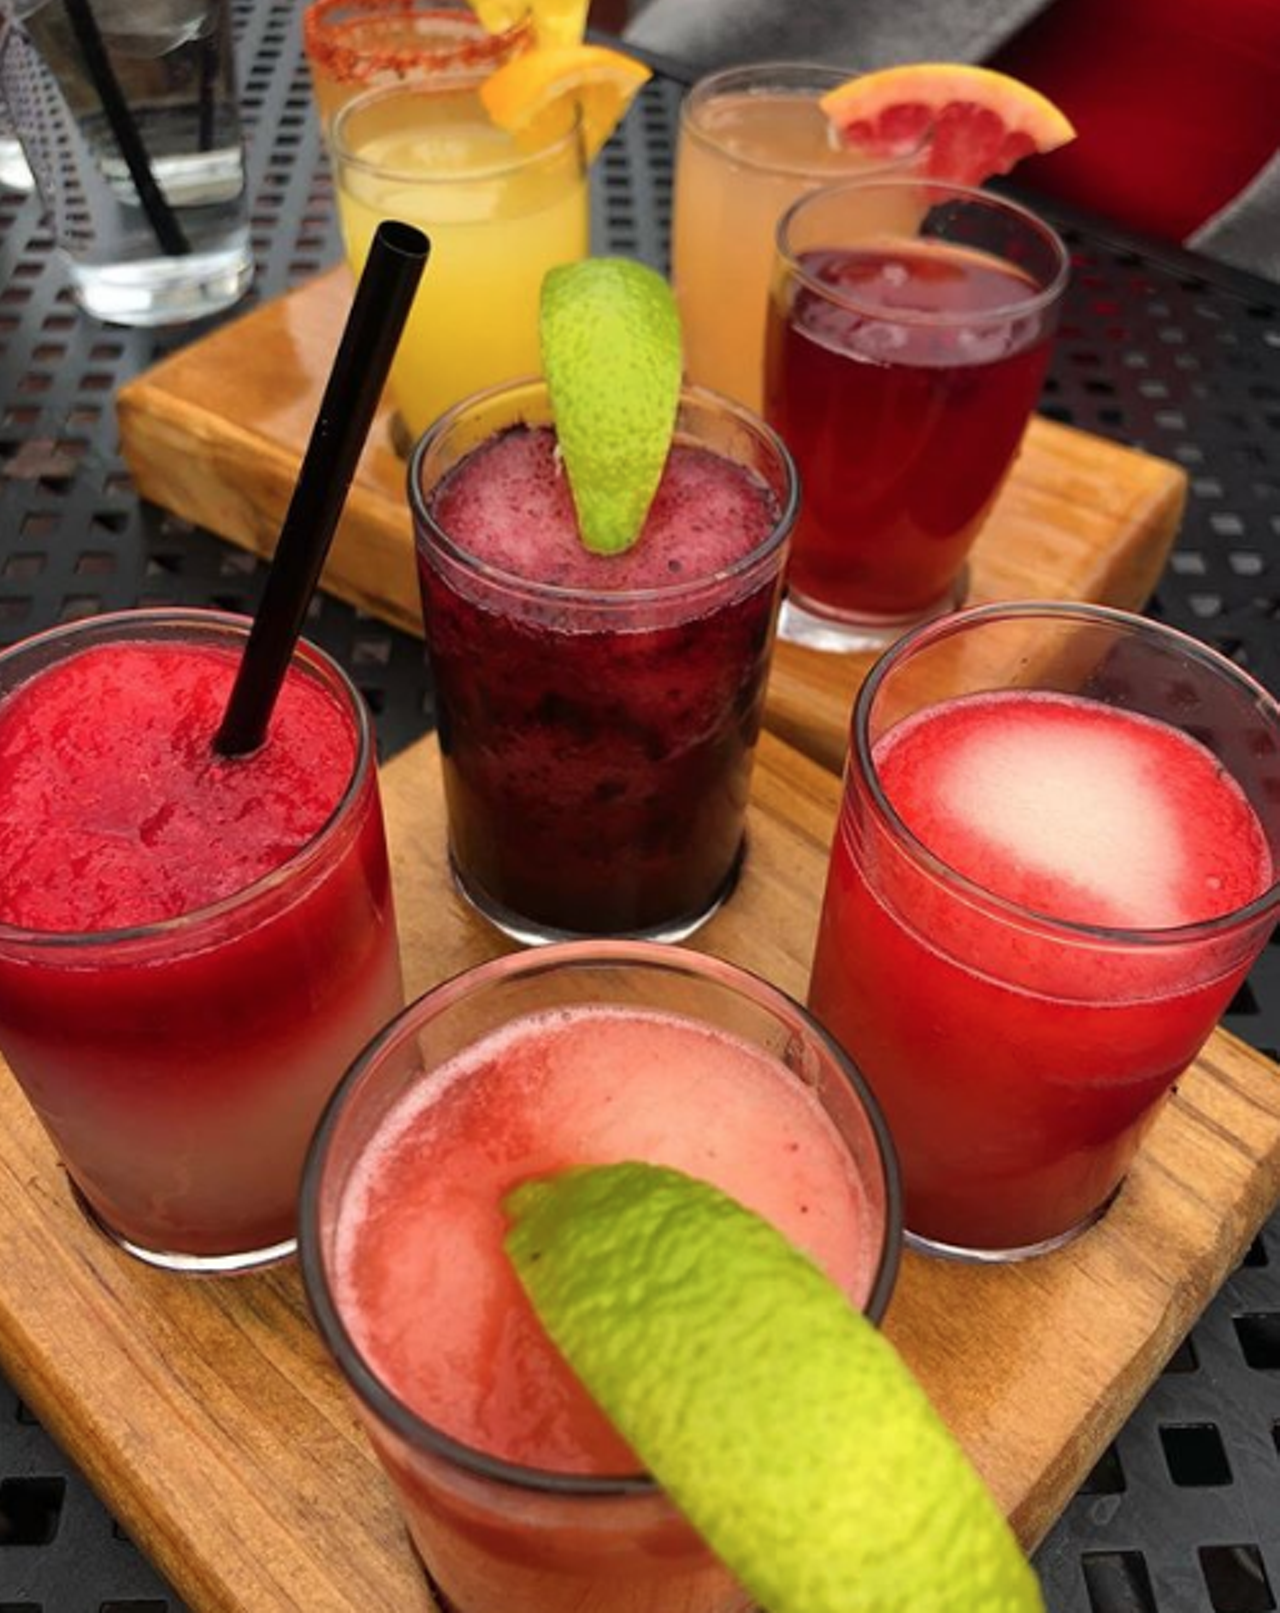 Sangria on the Burg
5115 Fredericksburg Road, (210) 265-3763, sangriaontheburg.com
With a name like Sangria on the Burg, it’s obvious that the alcoholic offerings are going to be out of this world. Mix and match a flight of sliders for the full experience. 
Photo via Instagram / therunningwinemom